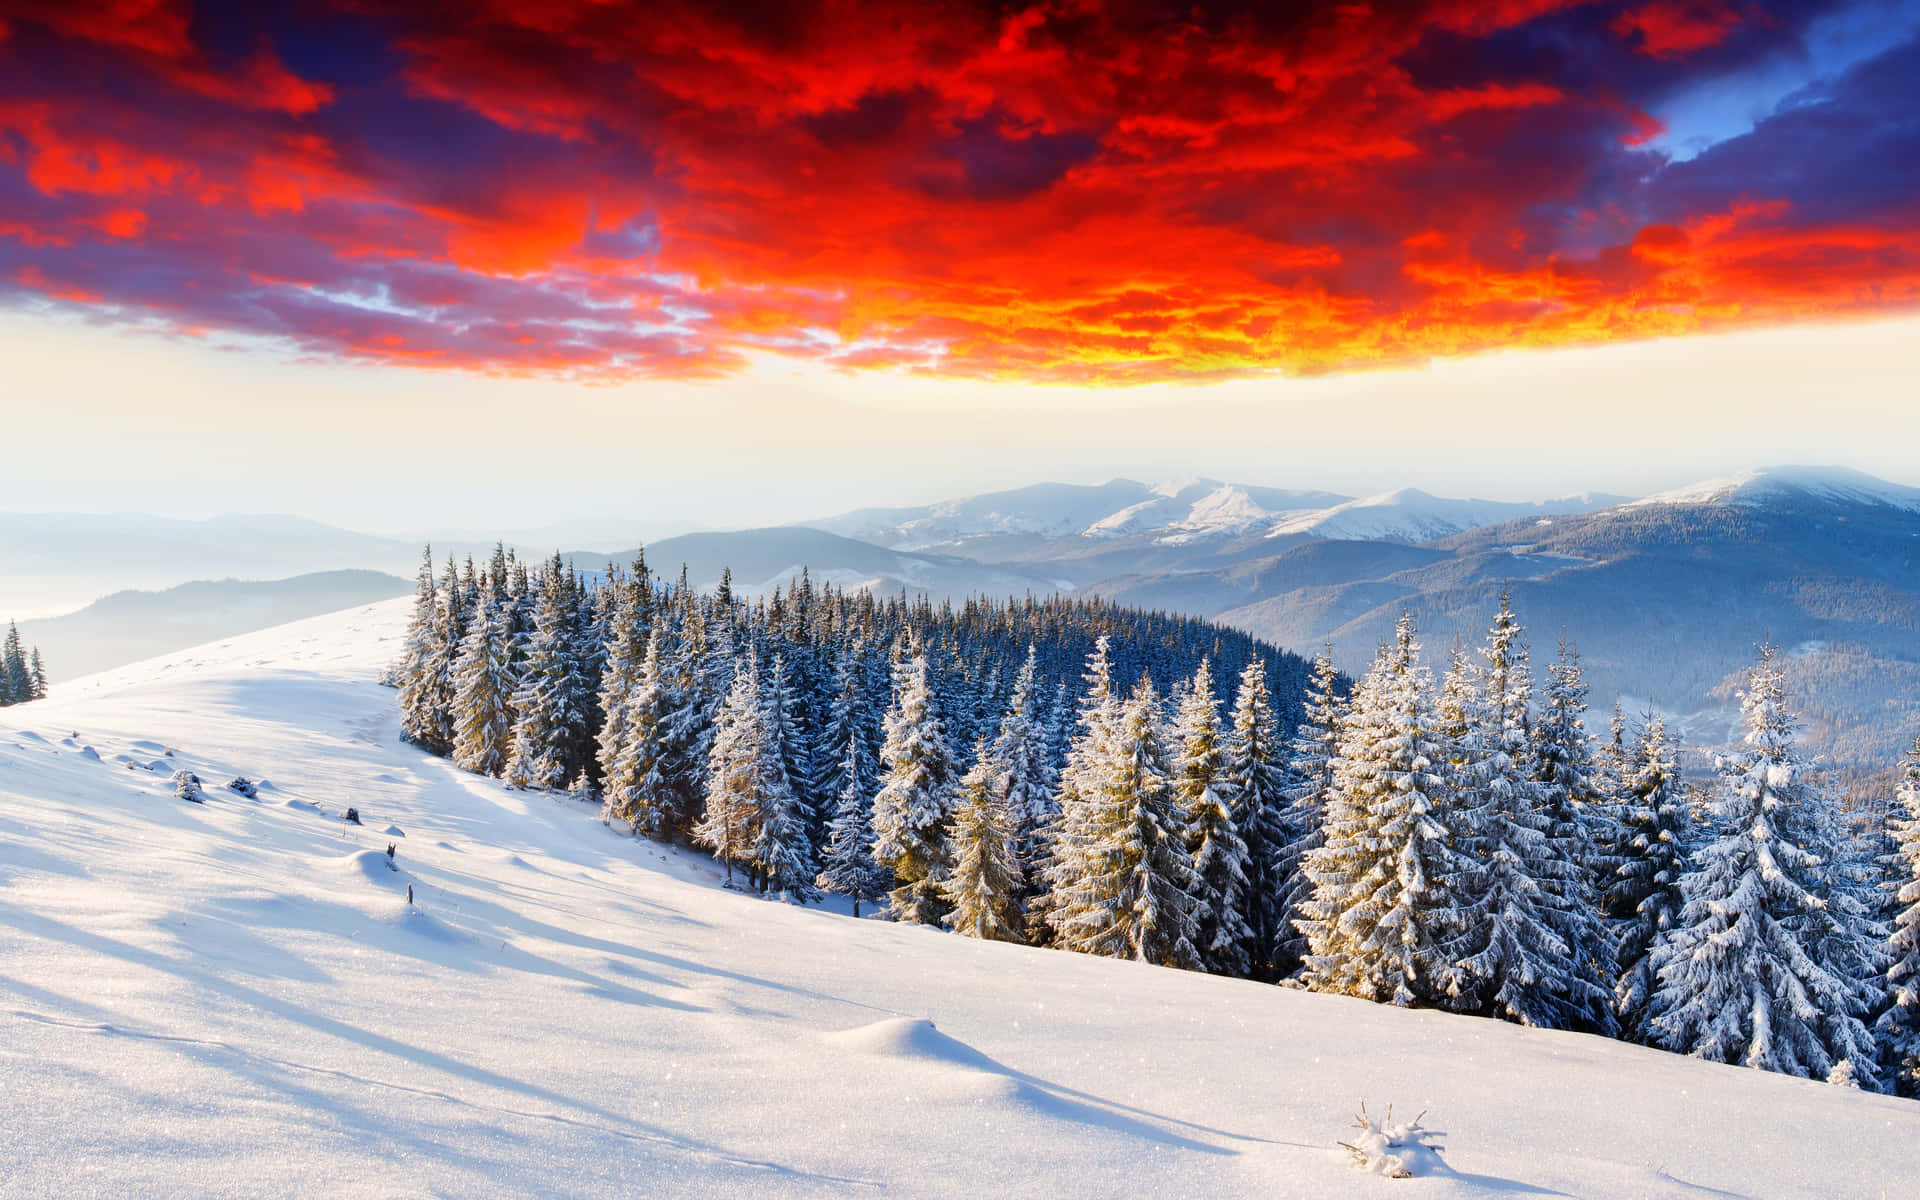 A Snowy Mountain With A Red Sky And Trees